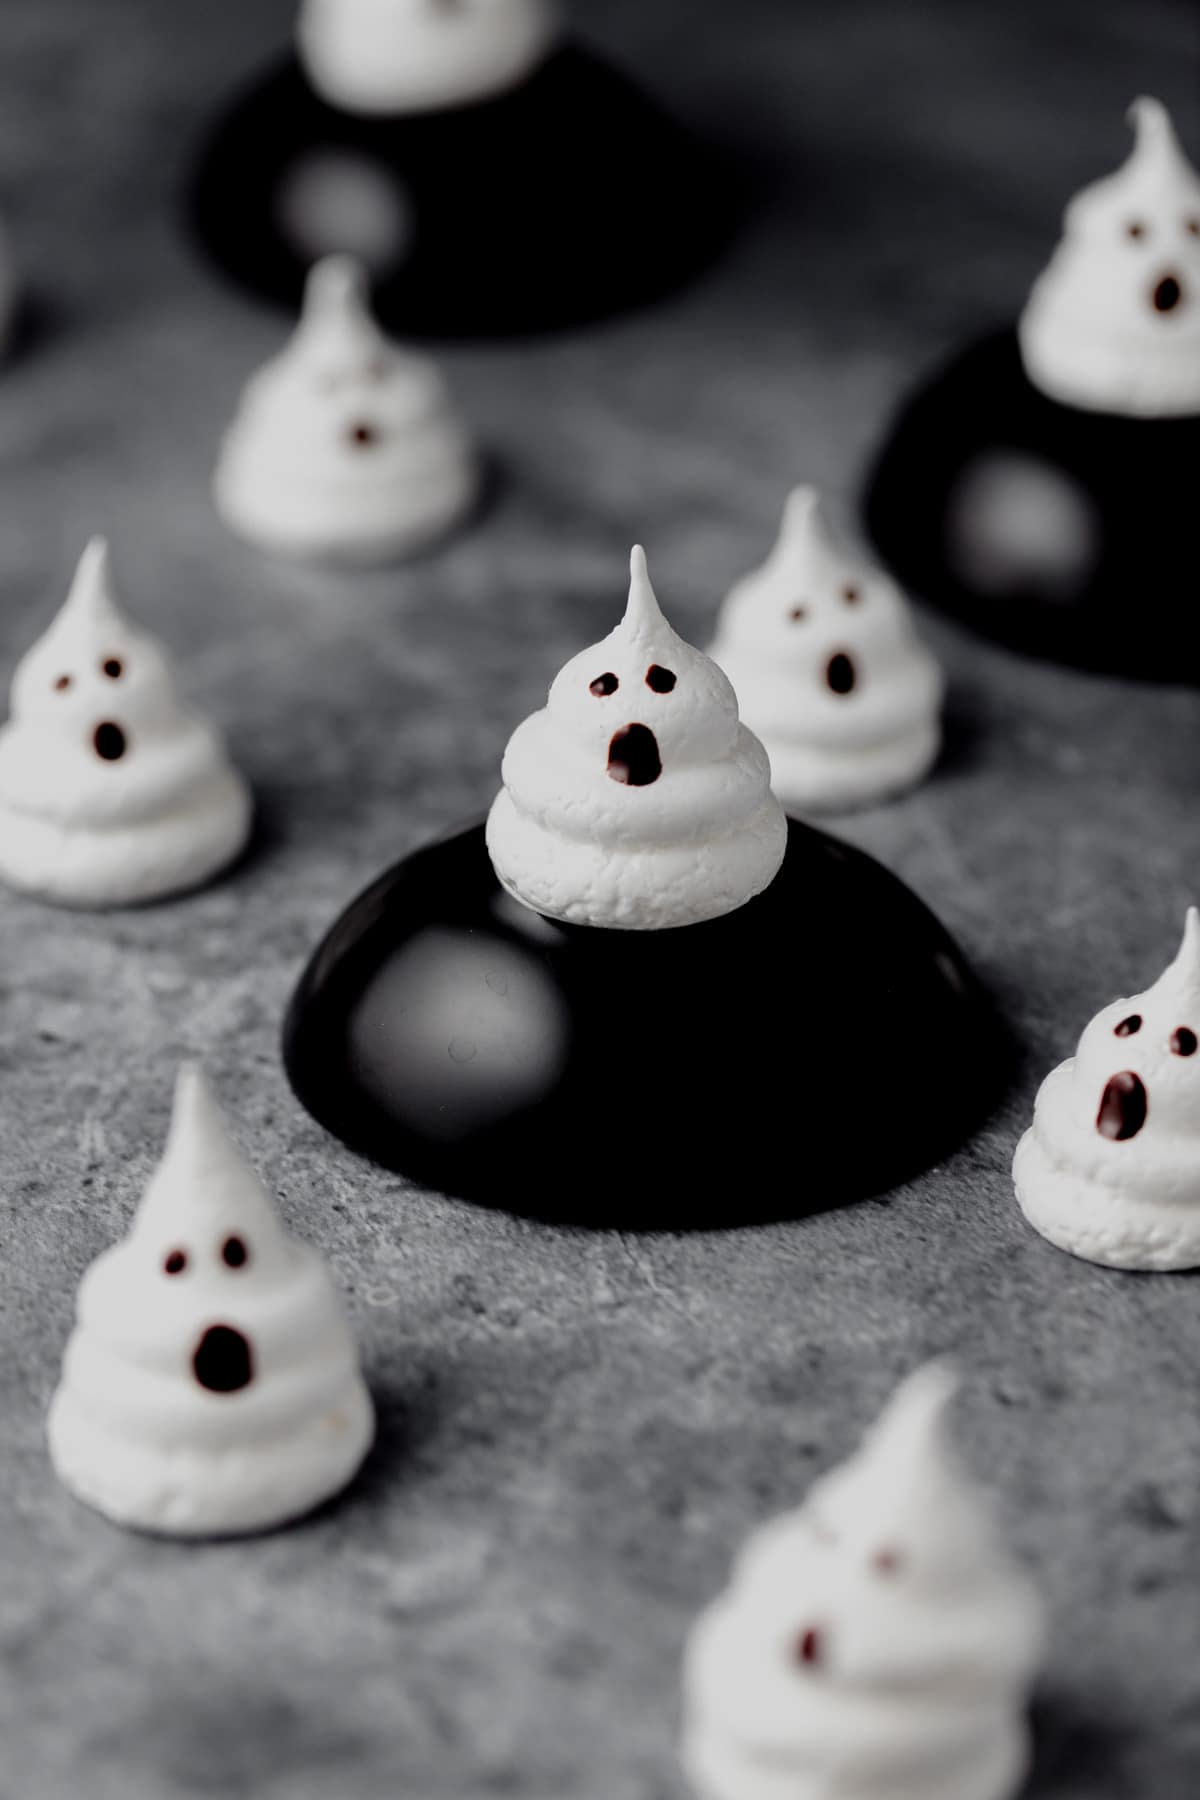 ghost meringue cookies with faces painted on